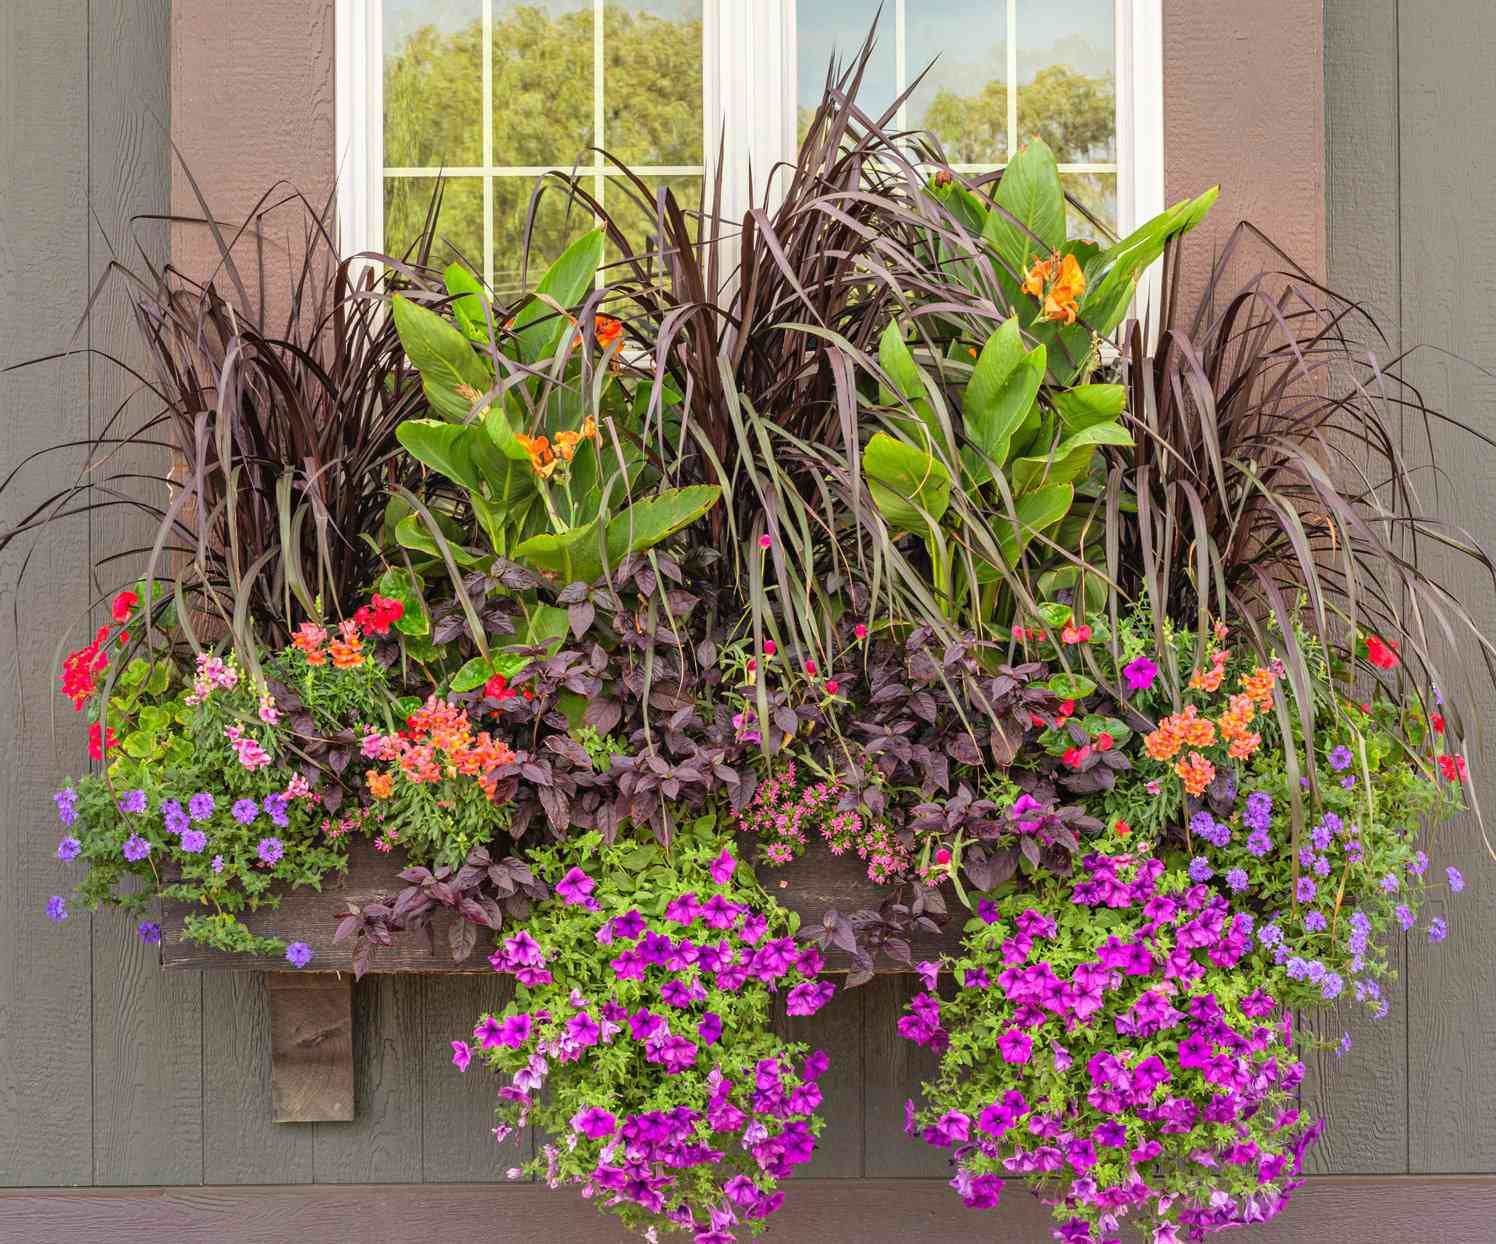 window boxes with lush purple flowers and grasses